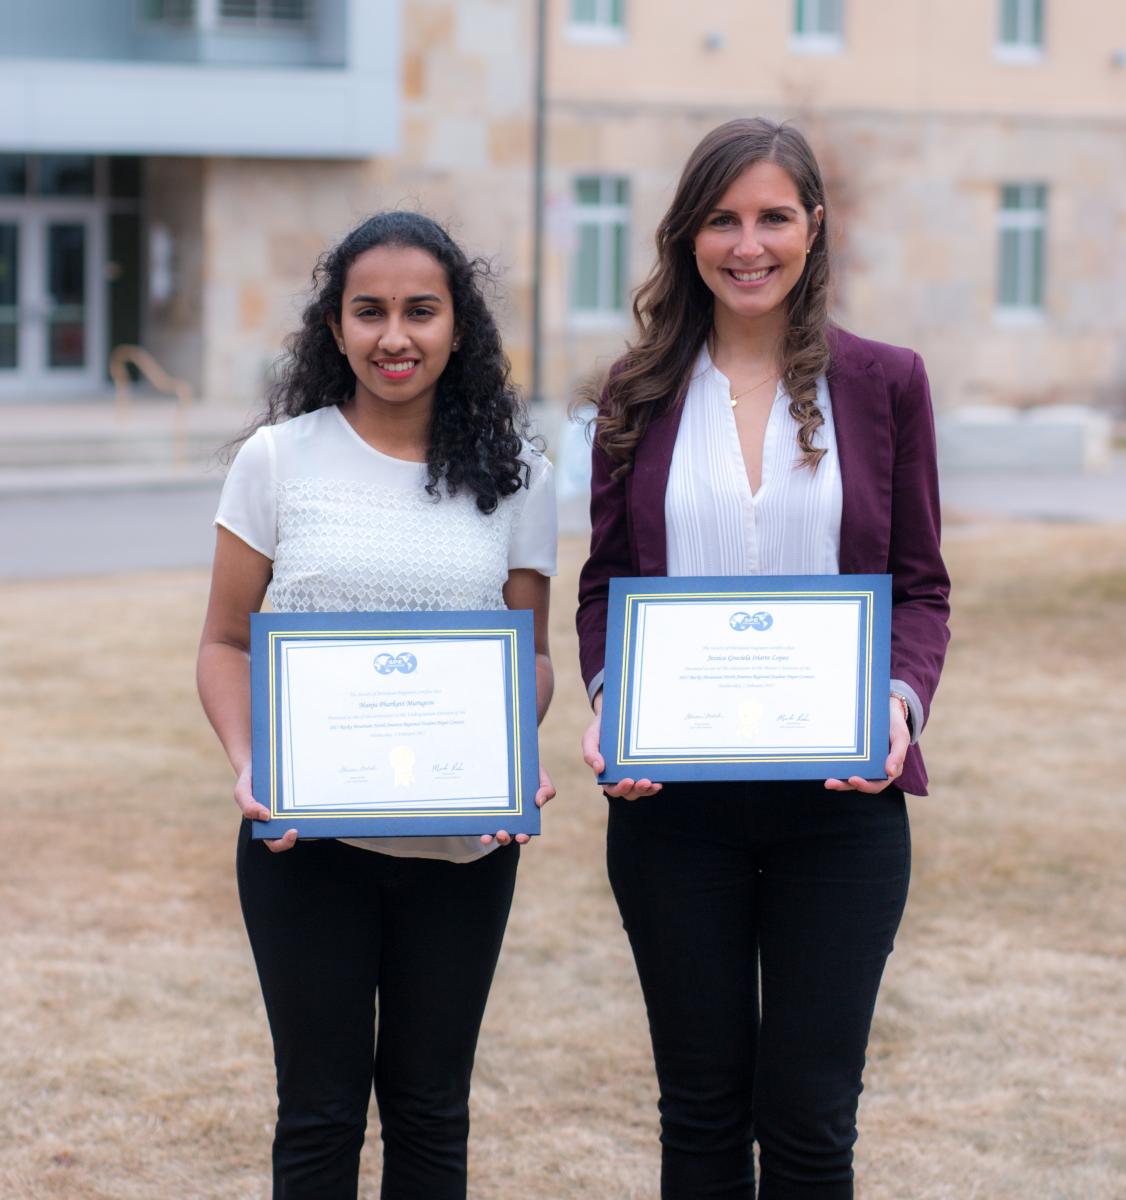 Manju and Jessica with their award plaques.